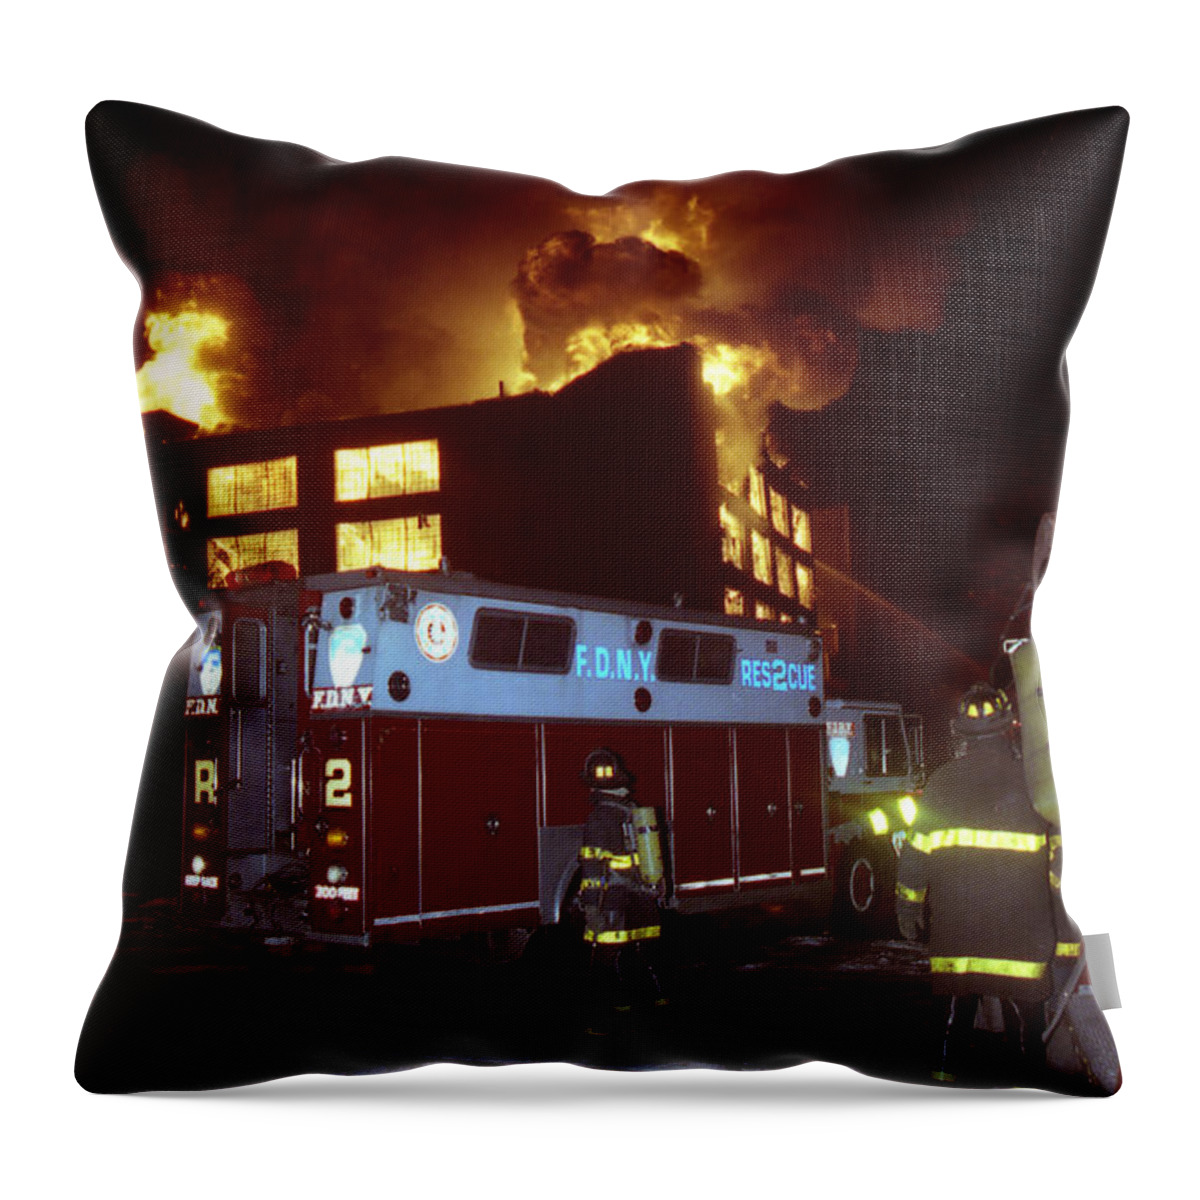 Fdny Throw Pillow featuring the photograph 1-15-91 77-55-272 McKibbin Street 5 Alarms by Steven Spak